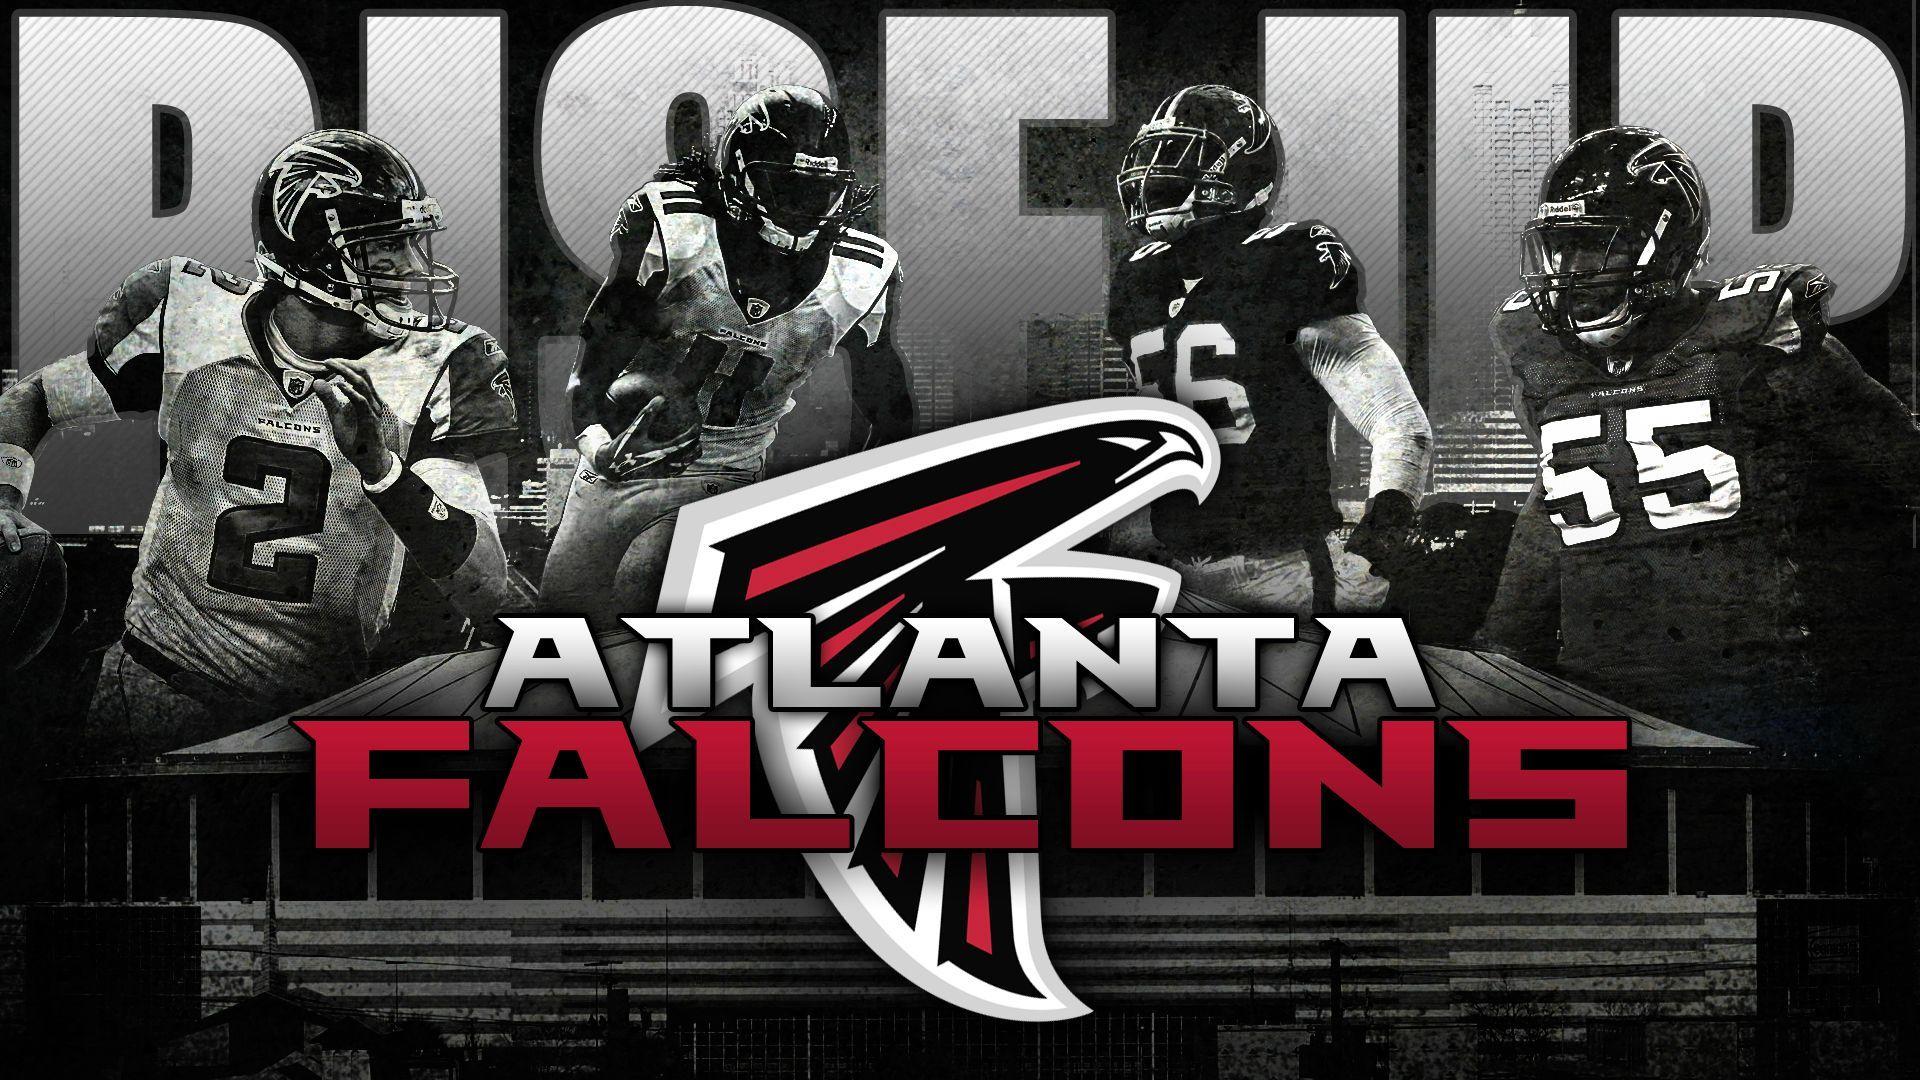 RISE UP FALCONS!! wallpaper i made for the playoffs